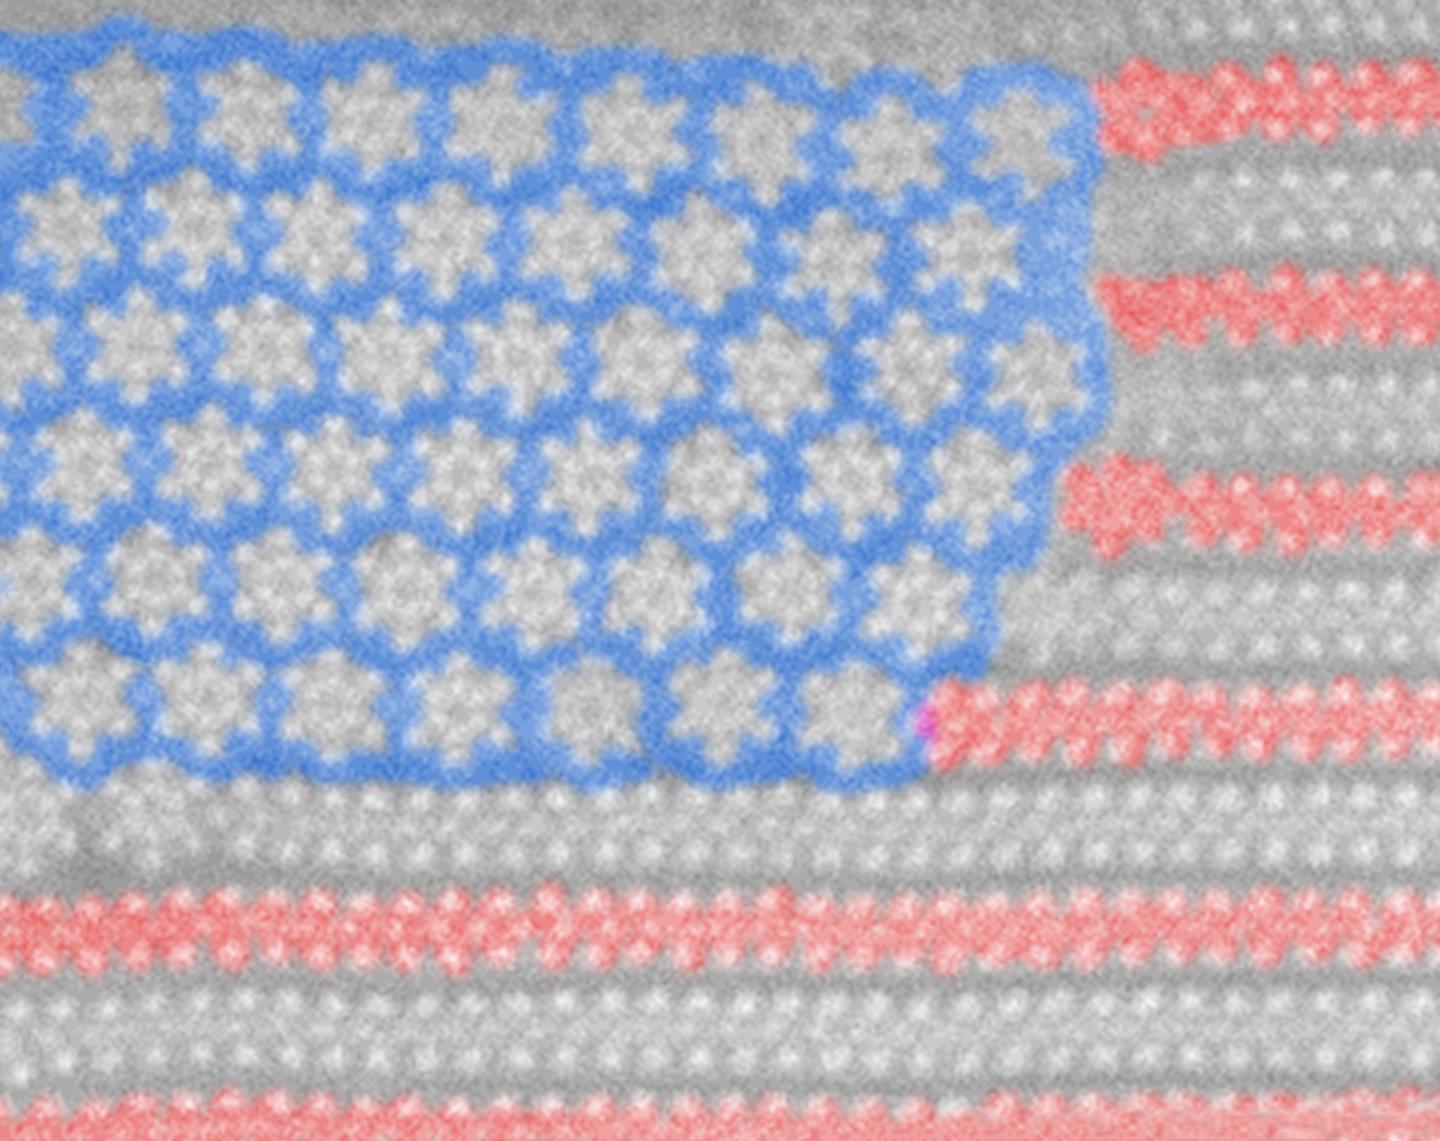 Unexpected, Star-Spangled Find May Lead to Advanced Electronics